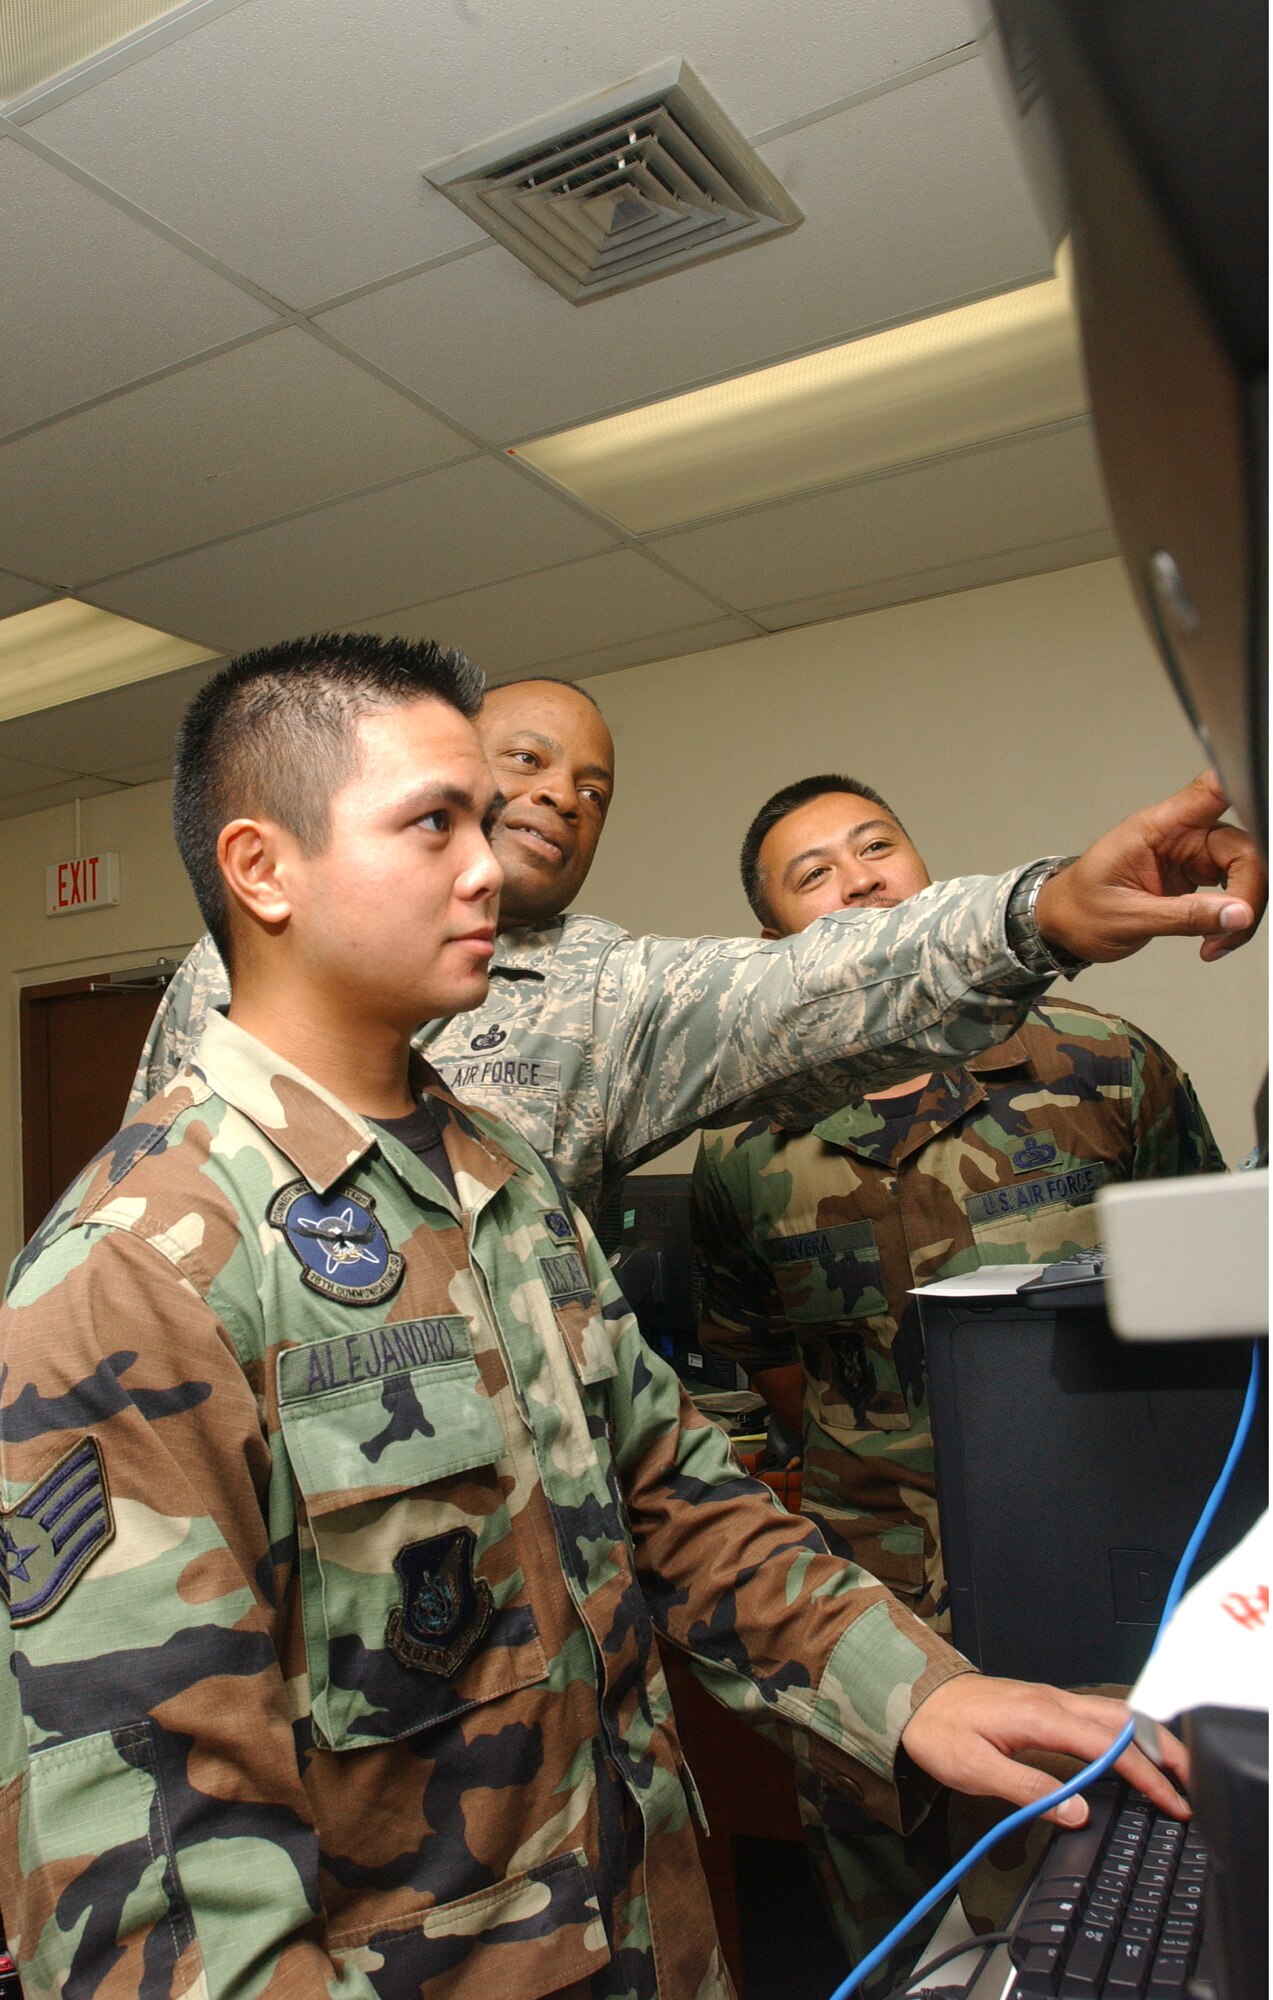 Master Sgt. Rickey Bryant (center), Senior Master Sgt. Vincent DeVera (right) and Staff Sgt Matthew Alejandro troubleshoot a component of the communications network they’re entrusted to protect.  These senior non-commissioned officers, with more than 40-years of hard won experience between them, are actively passing along that critical knowledge to the future of our Air Force. The U.S. military is unique in that senior ranking personnel are expected to have an active hand in training what will eventually become their replacements. (Air Force photo/Senior Airman Brian Kimball)